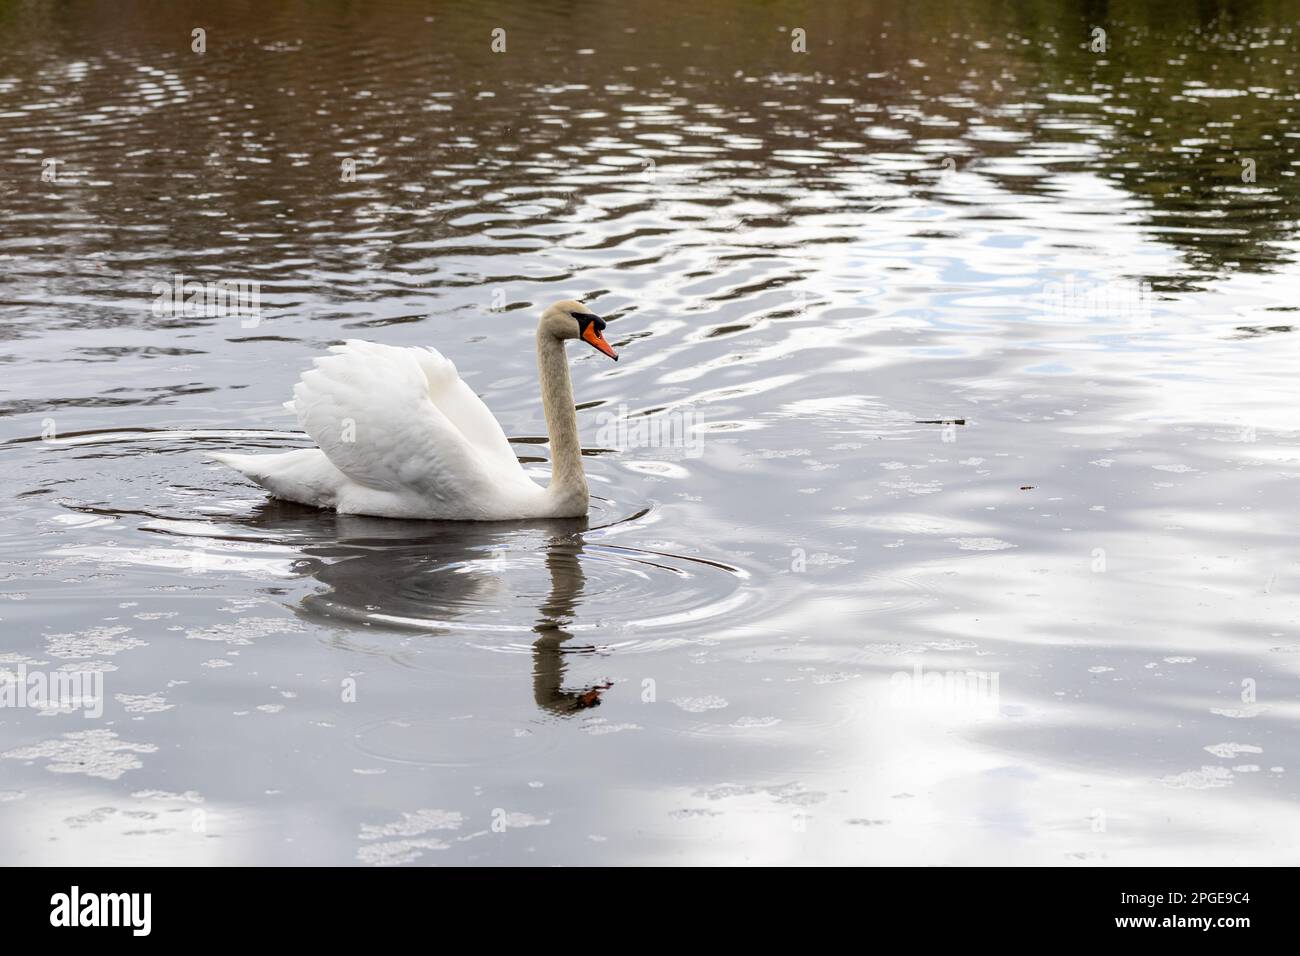 A Mute Swan swimming in a lake. England, UK Stock Photo